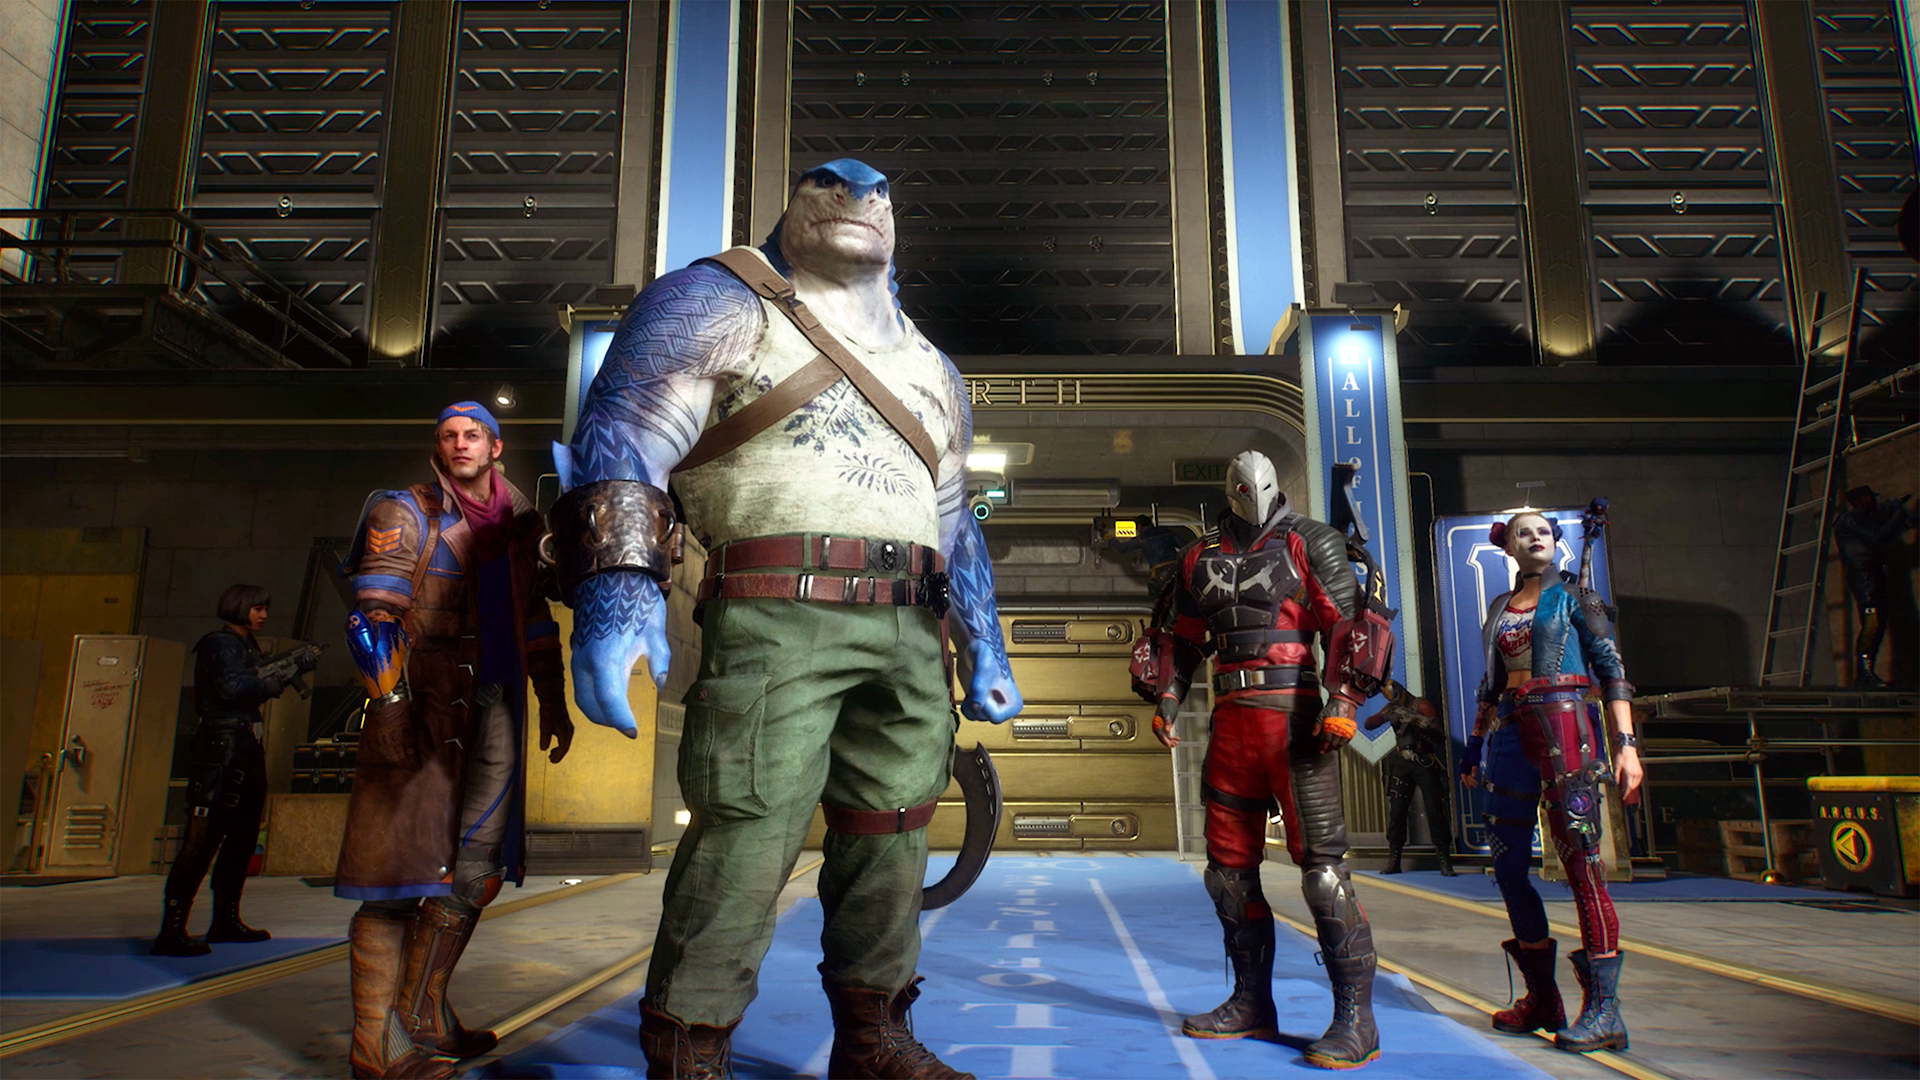 Captain Boomerang, King Shark, Deadshot and Harley Quinn stand outside the Hall of Justice museum in a screenshot from Suicide Squad: Kill the Justice League